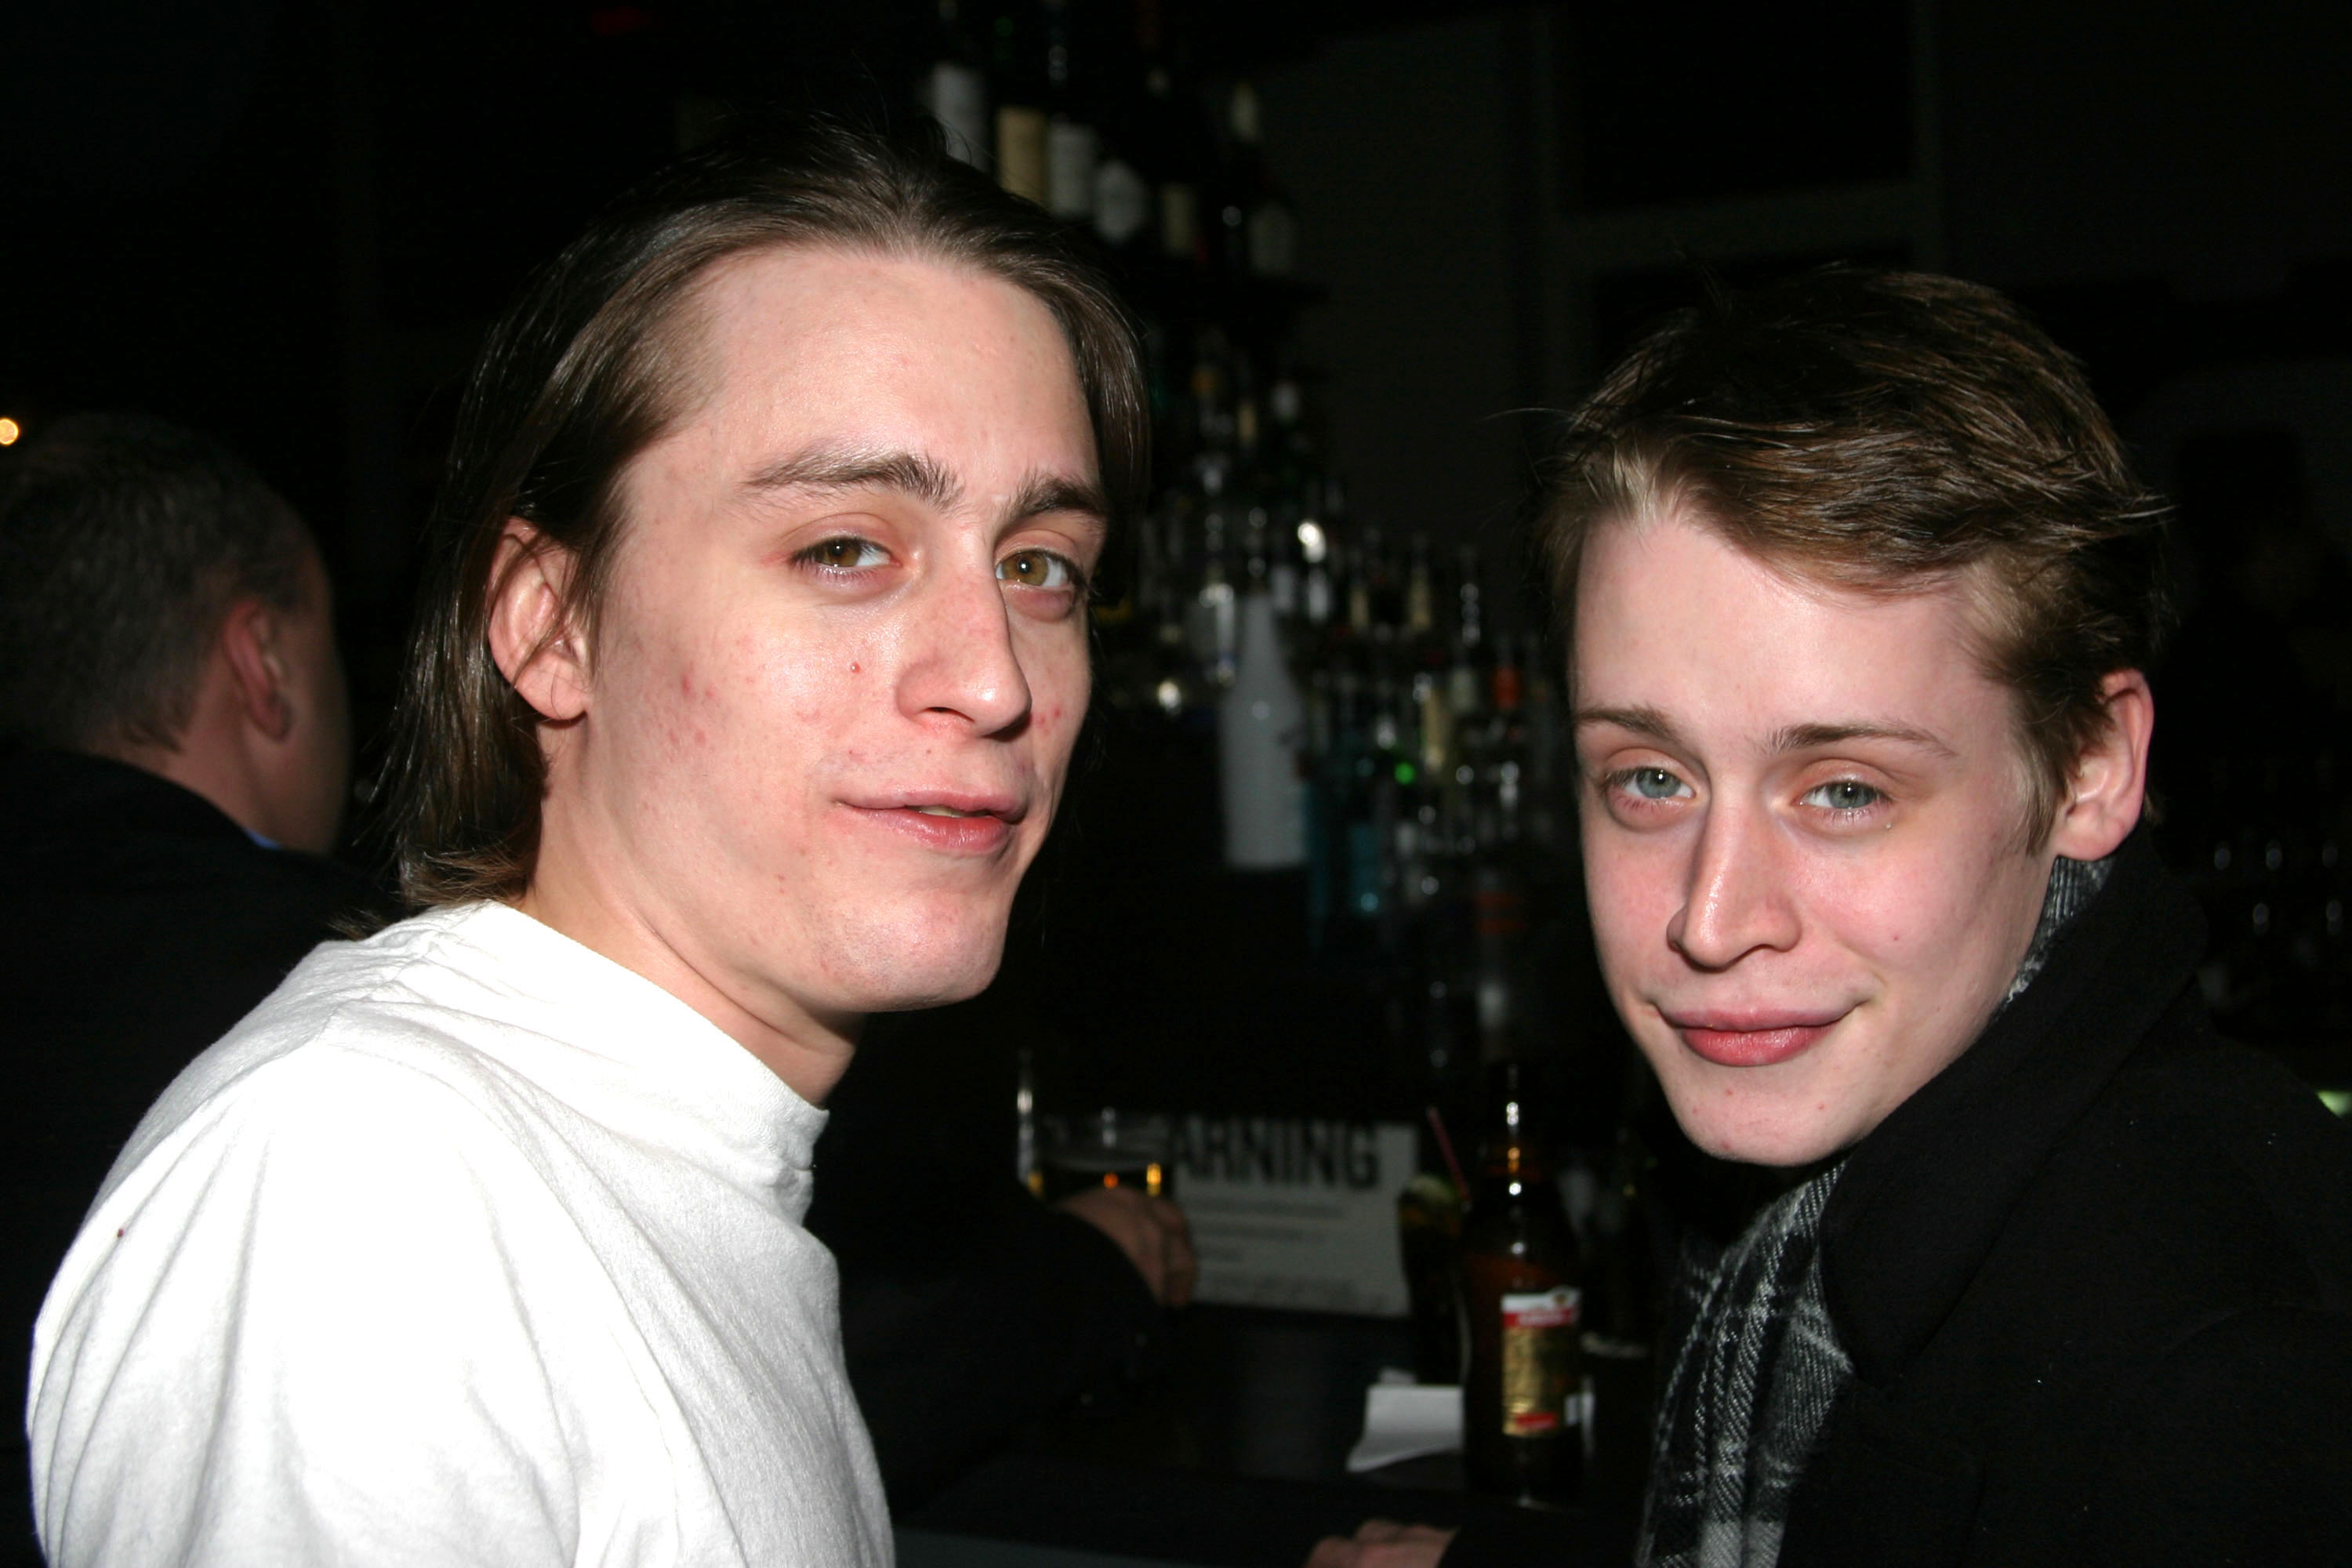 Kieran and Macaulay Culkin attend the "After Ashley" premiere after-party in New York City | Source: Getty Images